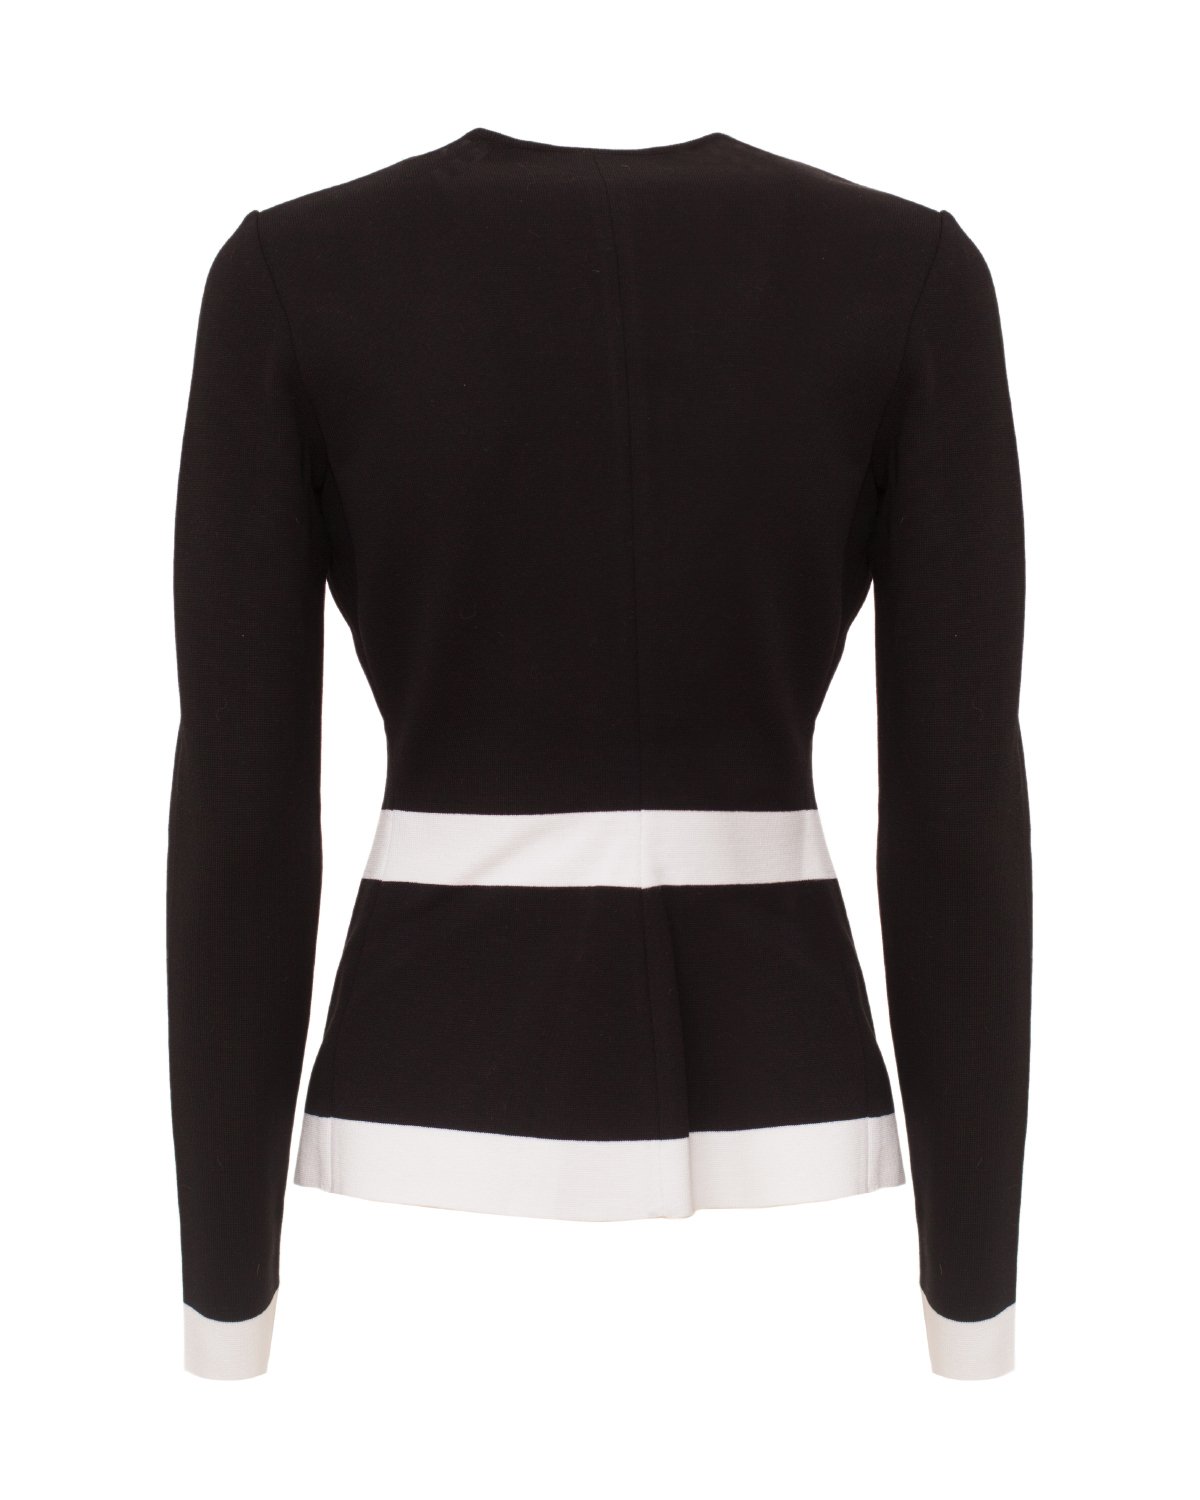 Black and White knit jacket | Temporary Flash Sale | Genny